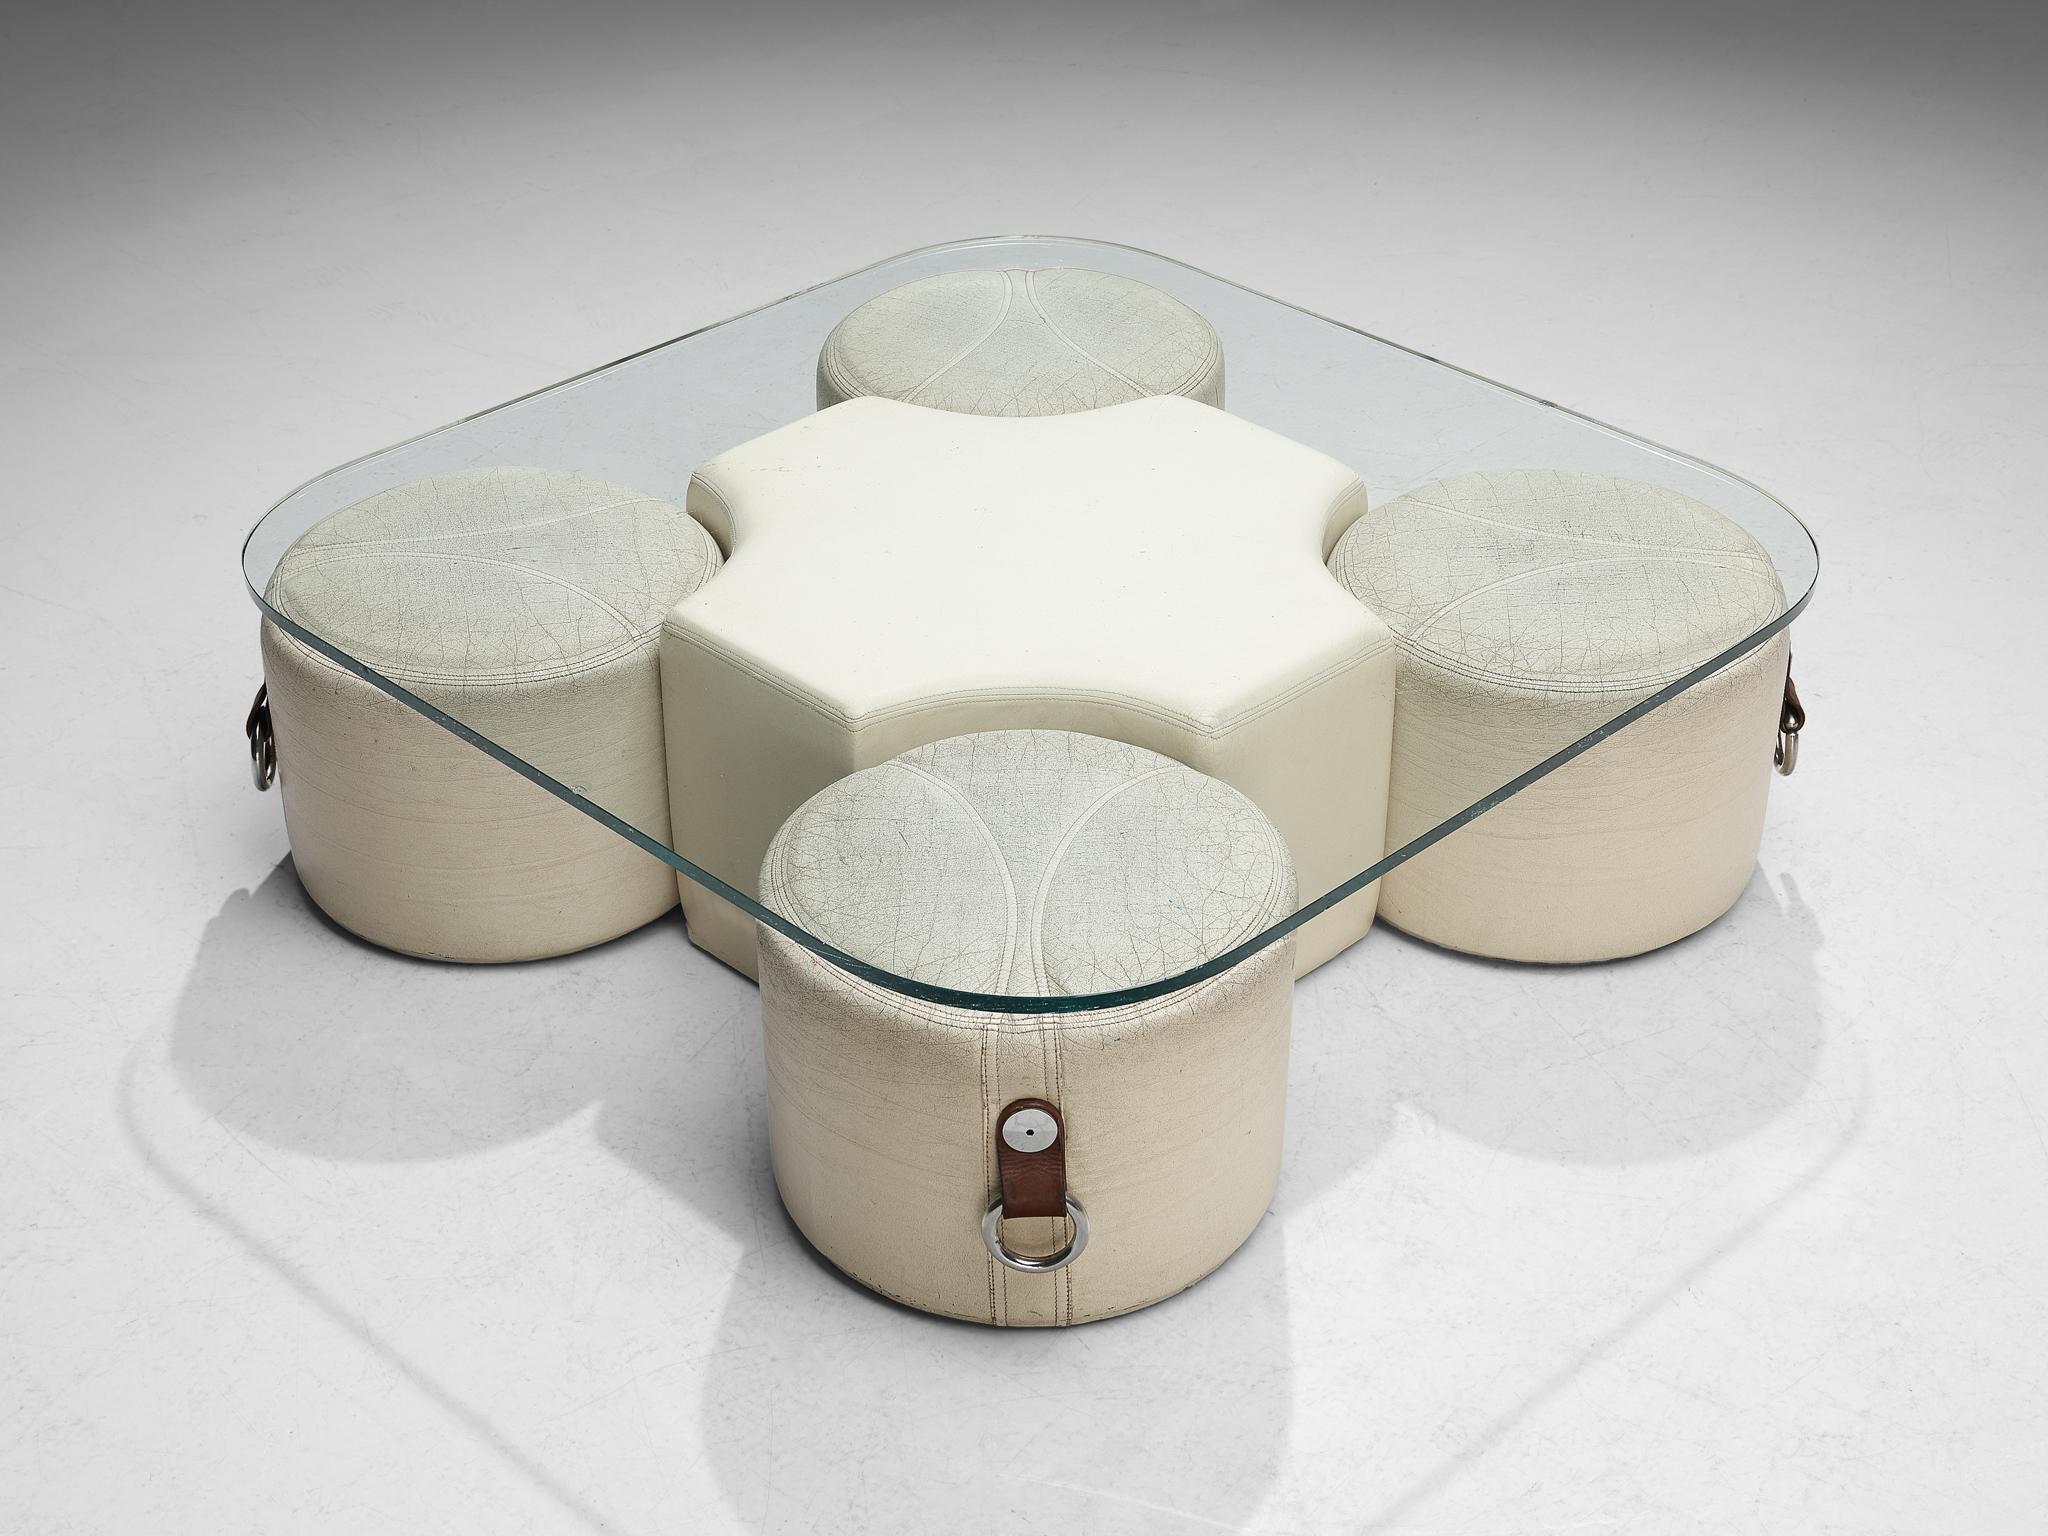 Guido Faleschini, set of coffee table and four stools, leather, glass, chromed metal, Italy, 1970s

This unique set of one coffee table and four stools is designed by the creative Italian designer Guido Faleschini. This set truly exudes the bright